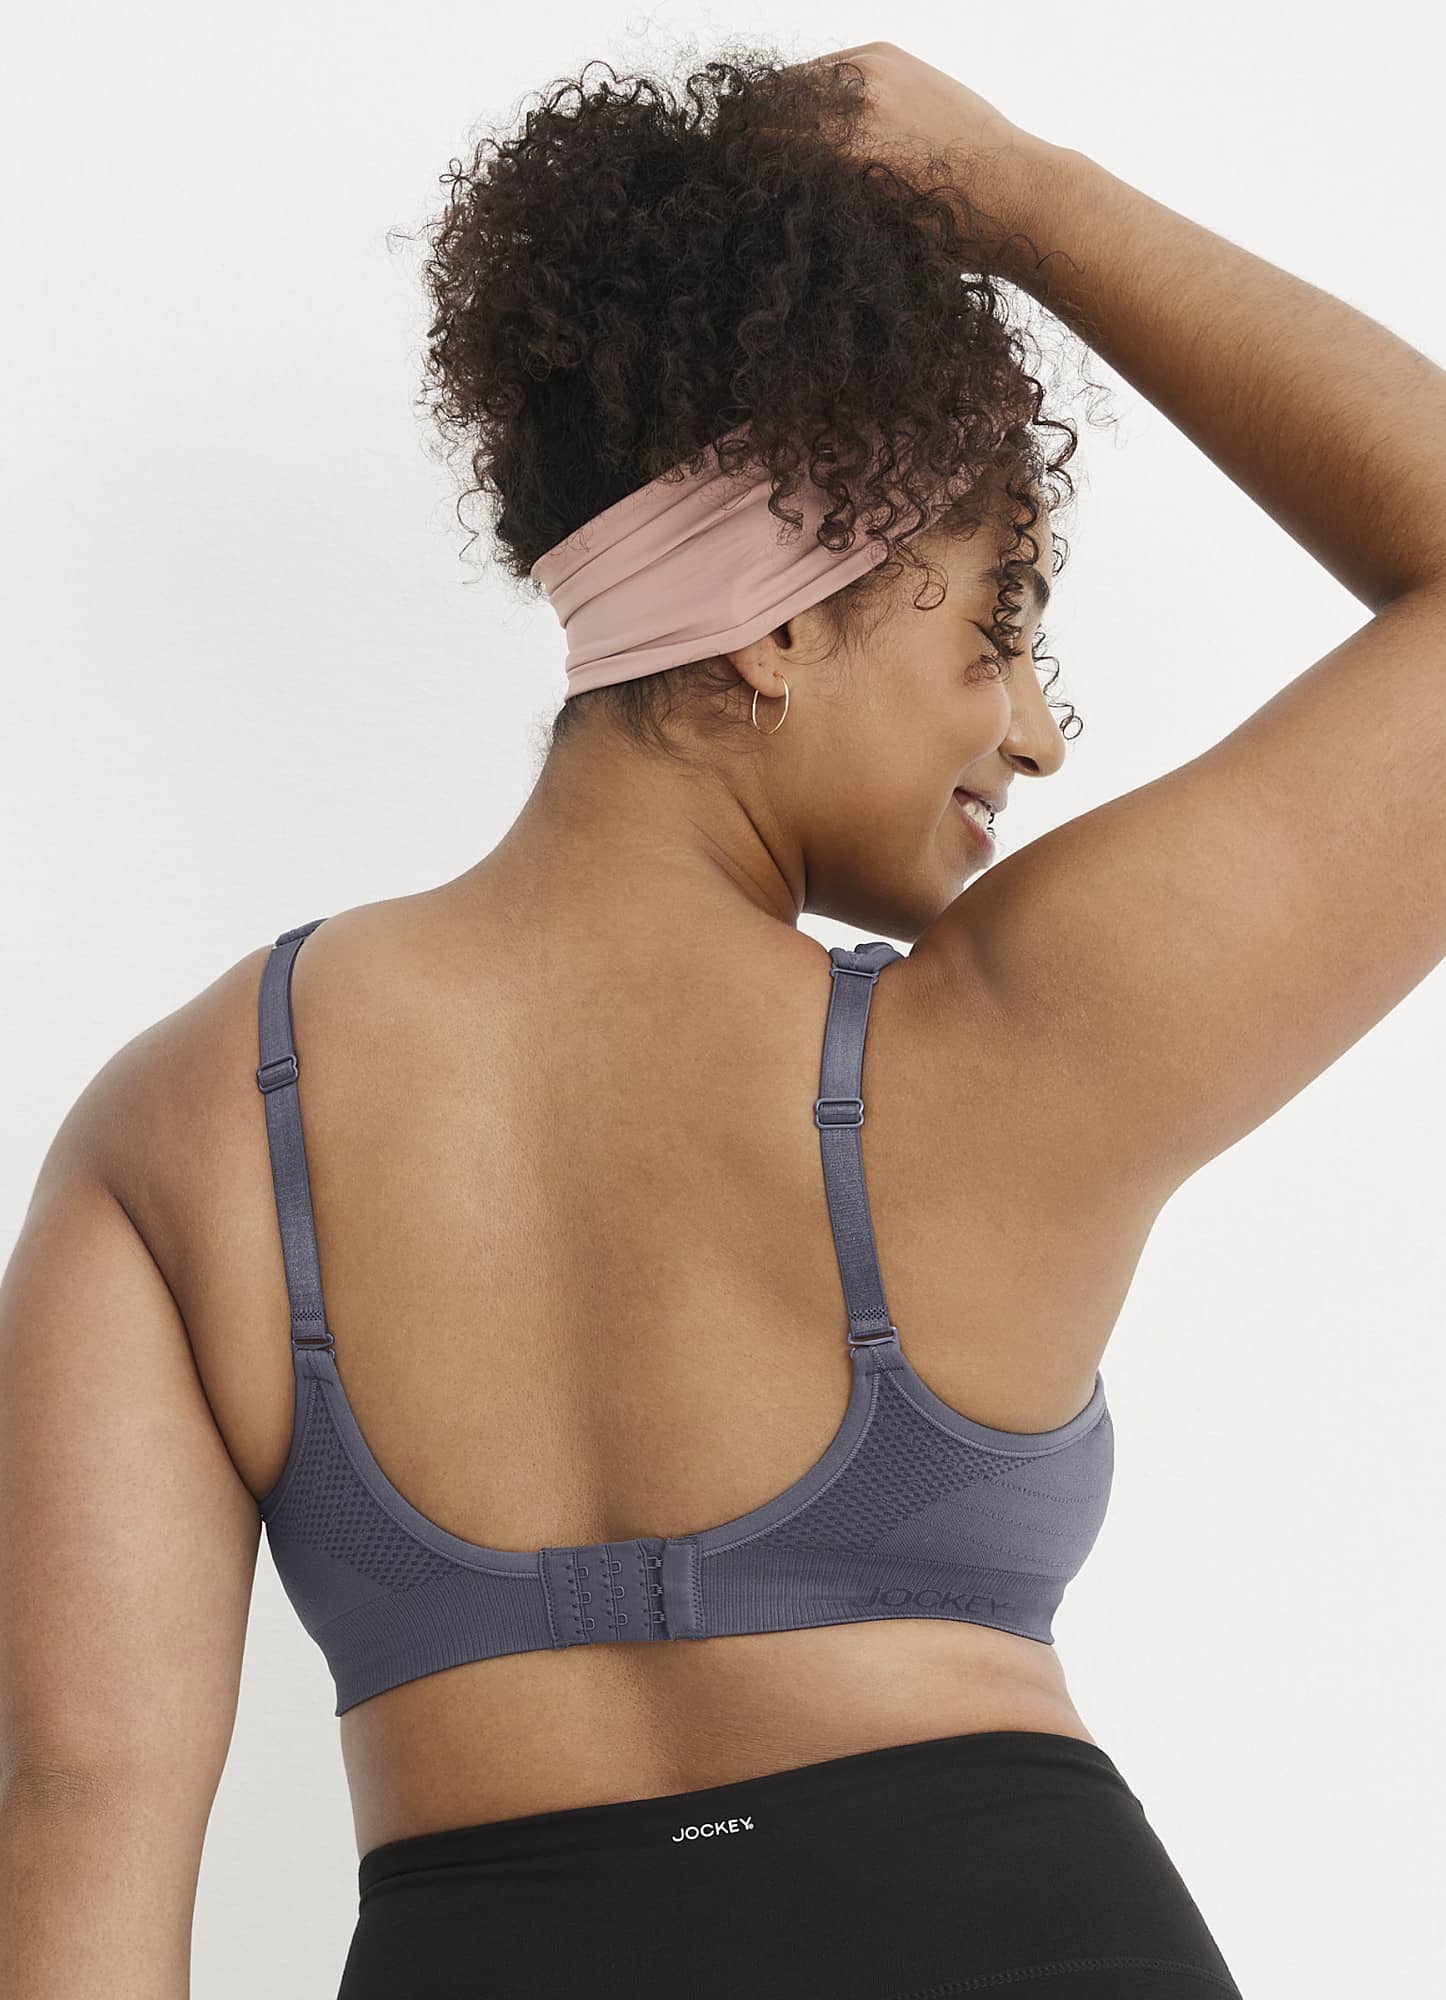 1,067 Sports Bra That Lifts And Separates Images, Stock Photos, 3D objects,  & Vectors